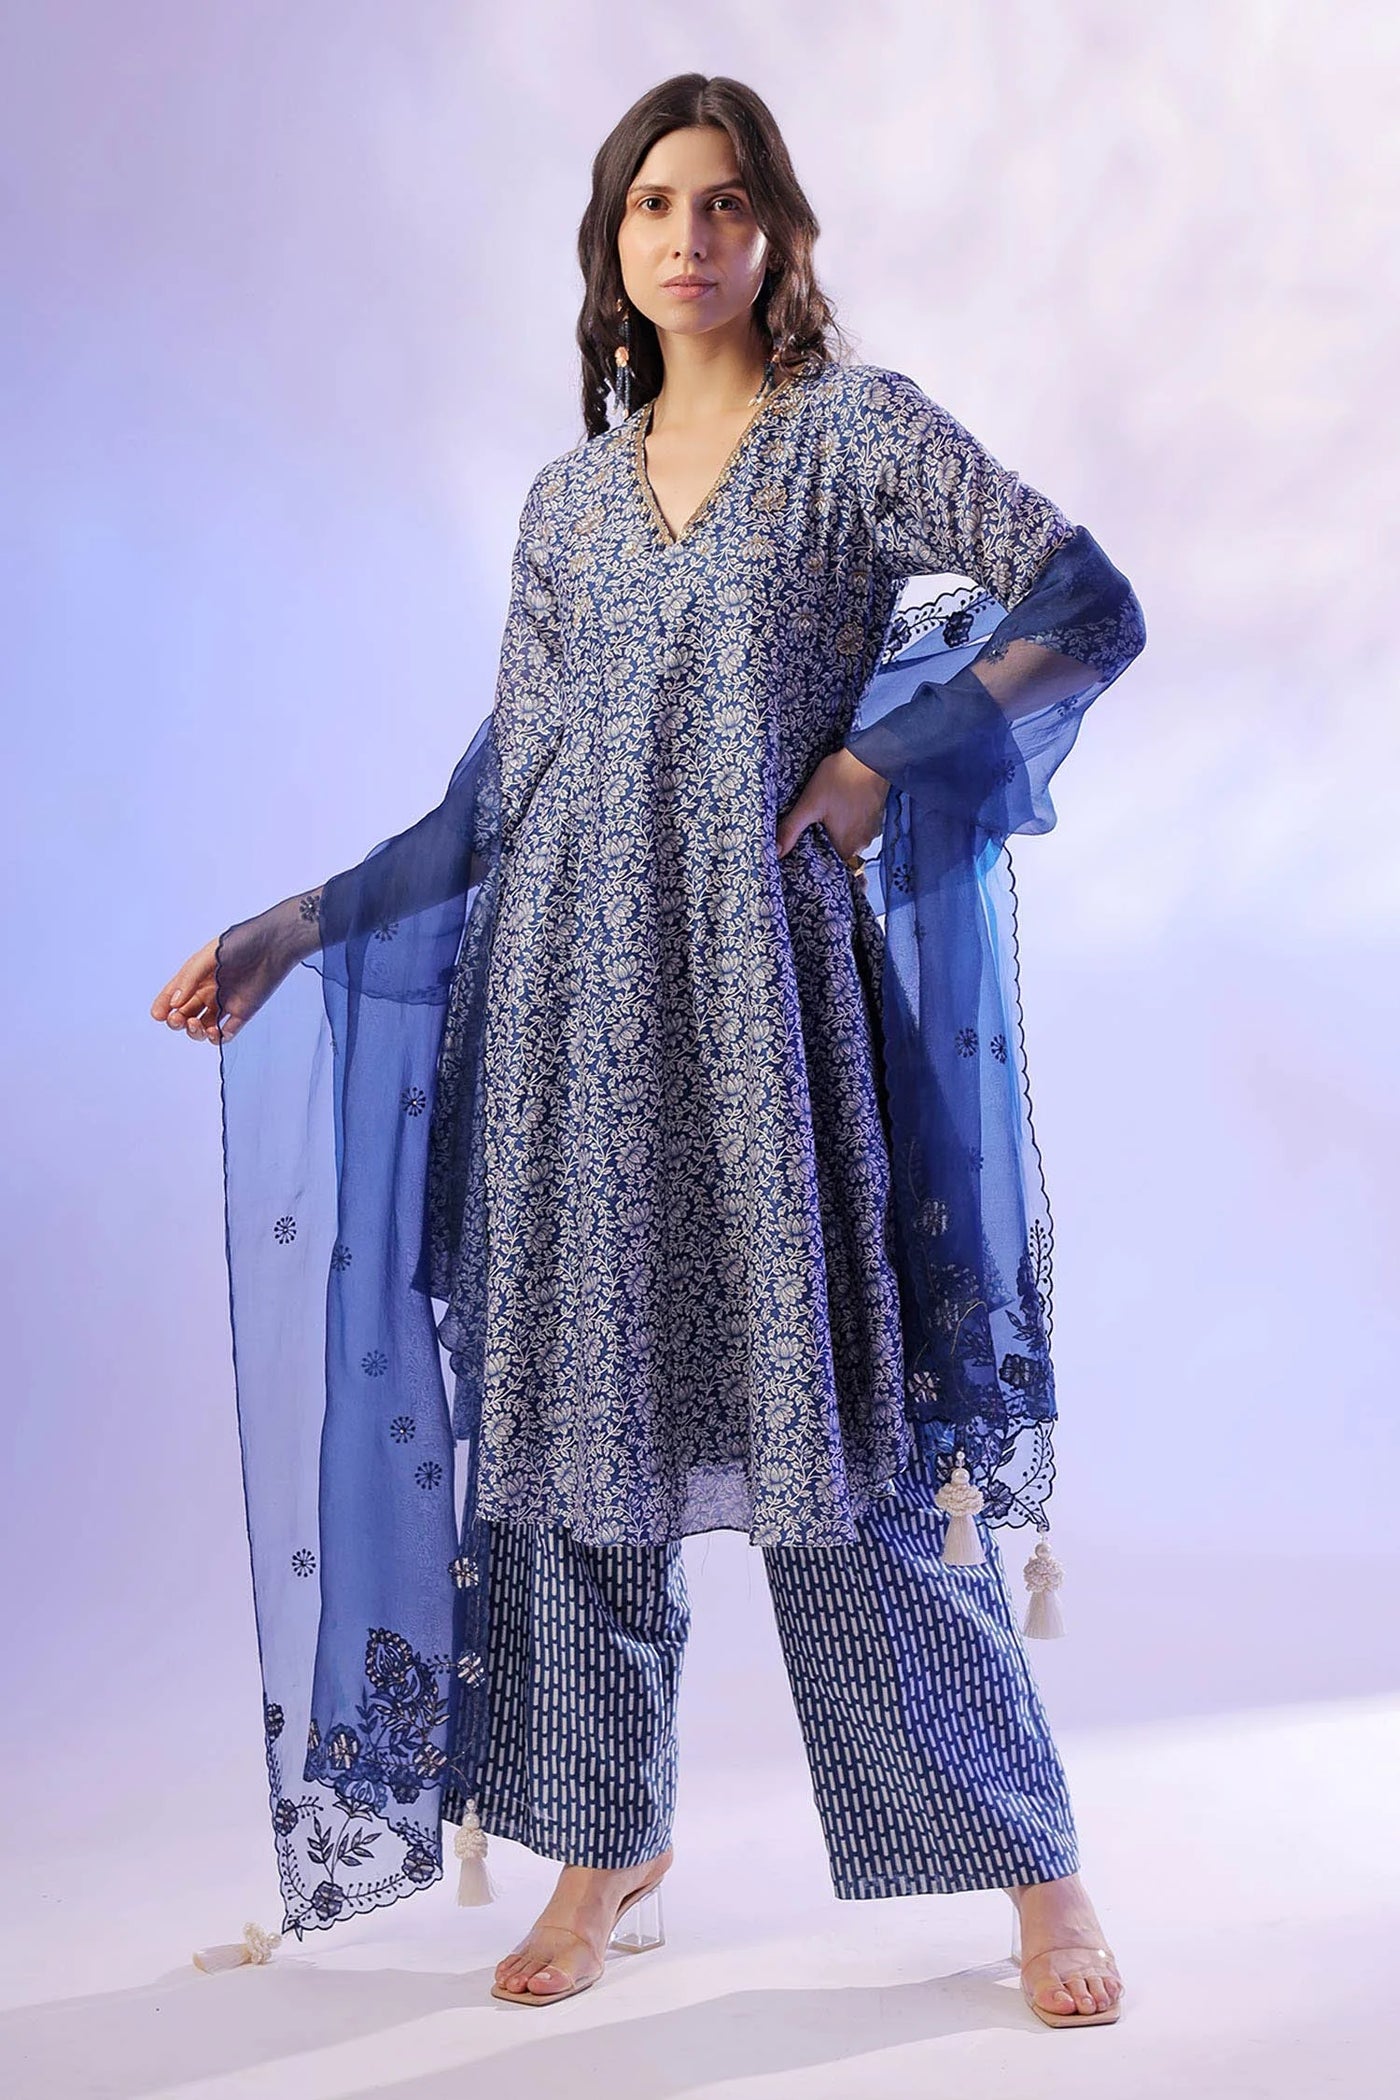 Blue Organza Anarkali Set Indian Clothing in Denver, CO, Aurora, CO, Boulder, CO, Fort Collins, CO, Colorado Springs, CO, Parker, CO, Highlands Ranch, CO, Cherry Creek, CO, Centennial, CO, and Longmont, CO. NATIONWIDE SHIPPING USA- India Fashion X